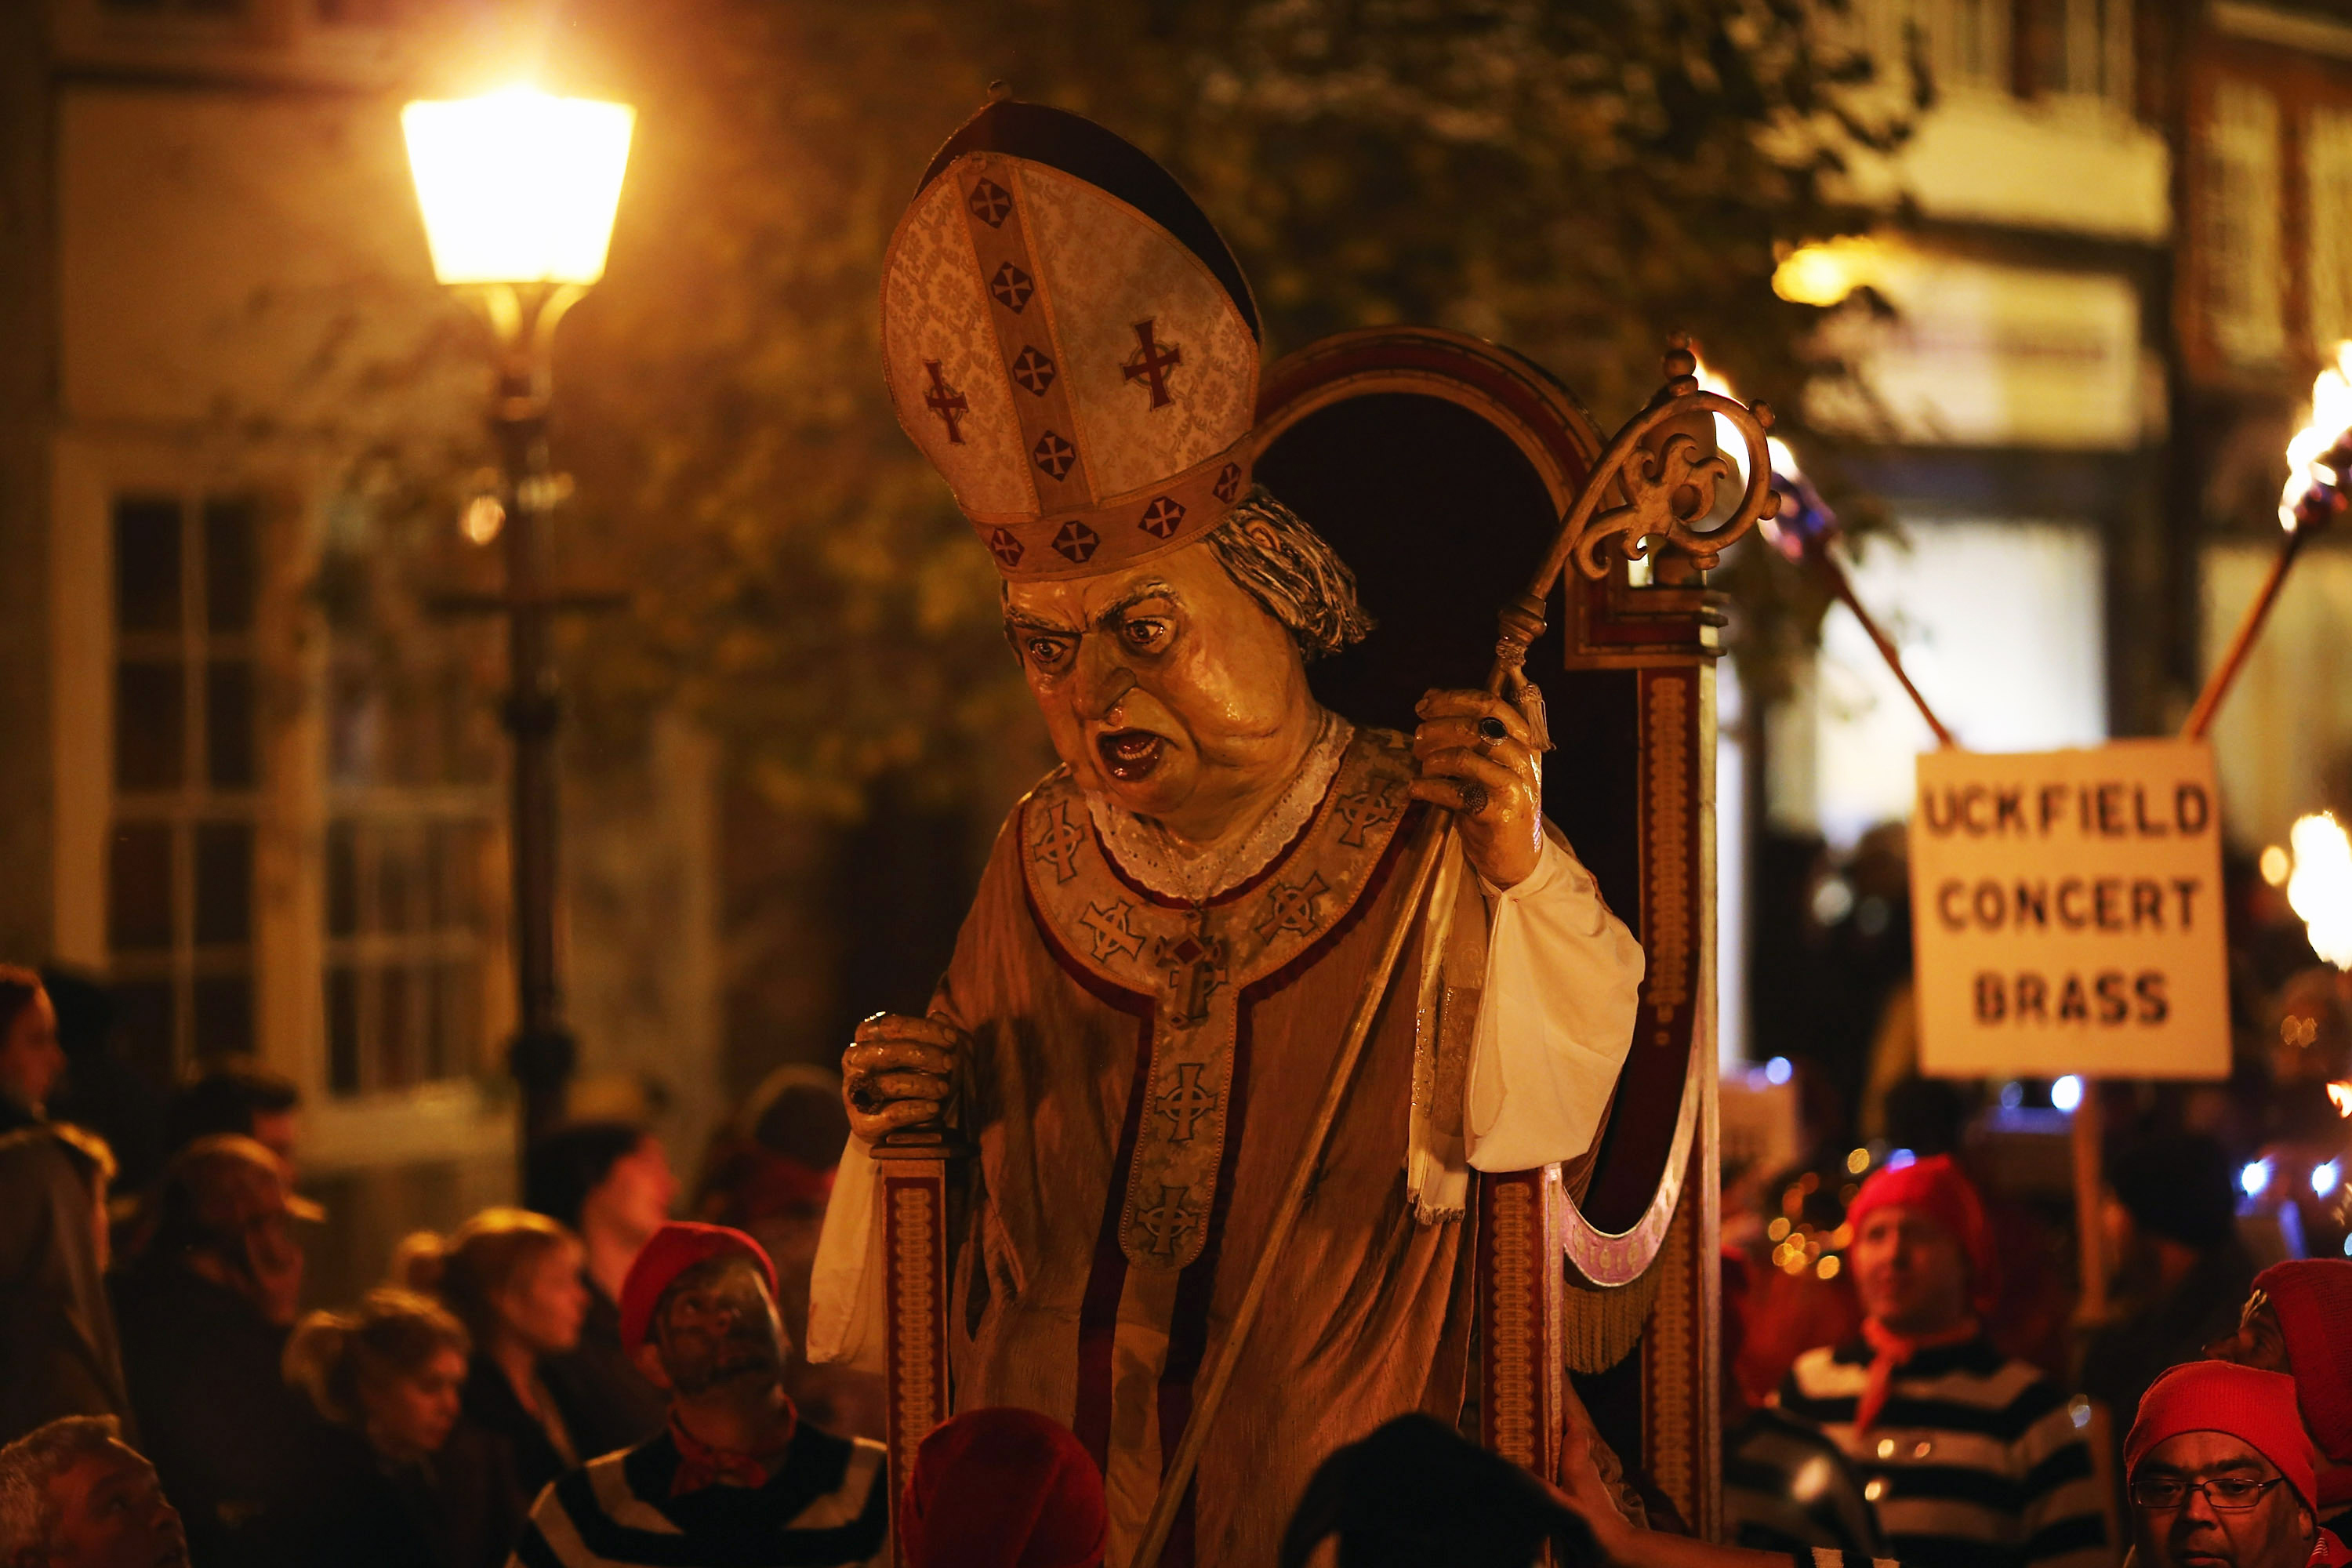 The Pope is an annual Lewes bonfire victim